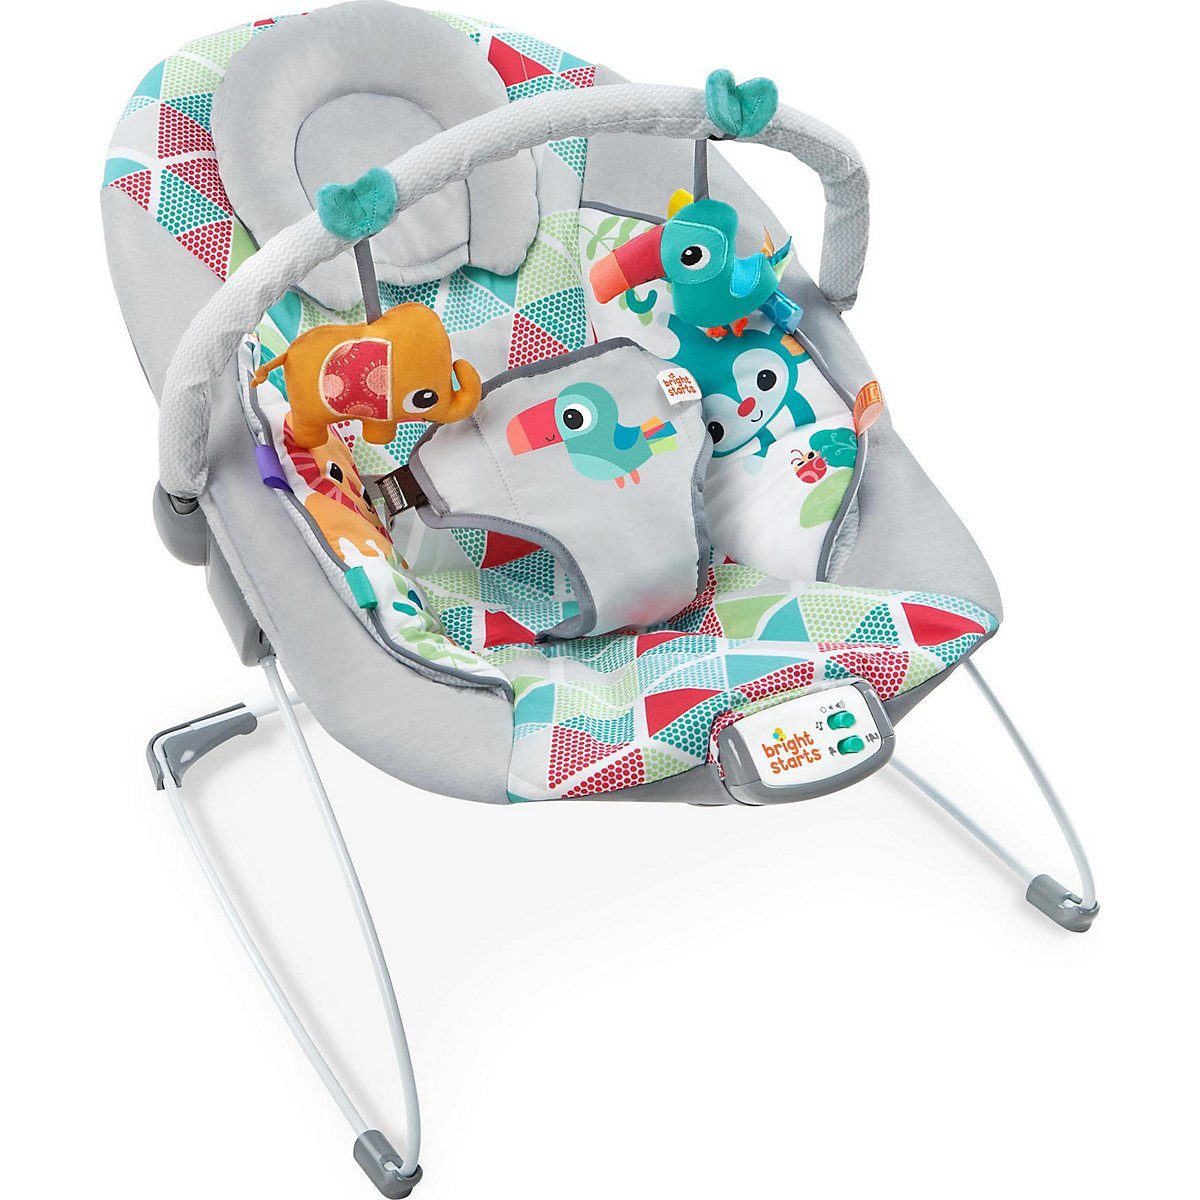 Bright Starts Babywippe Babywippe Toucan Tango inkl. Vibration und Melodien